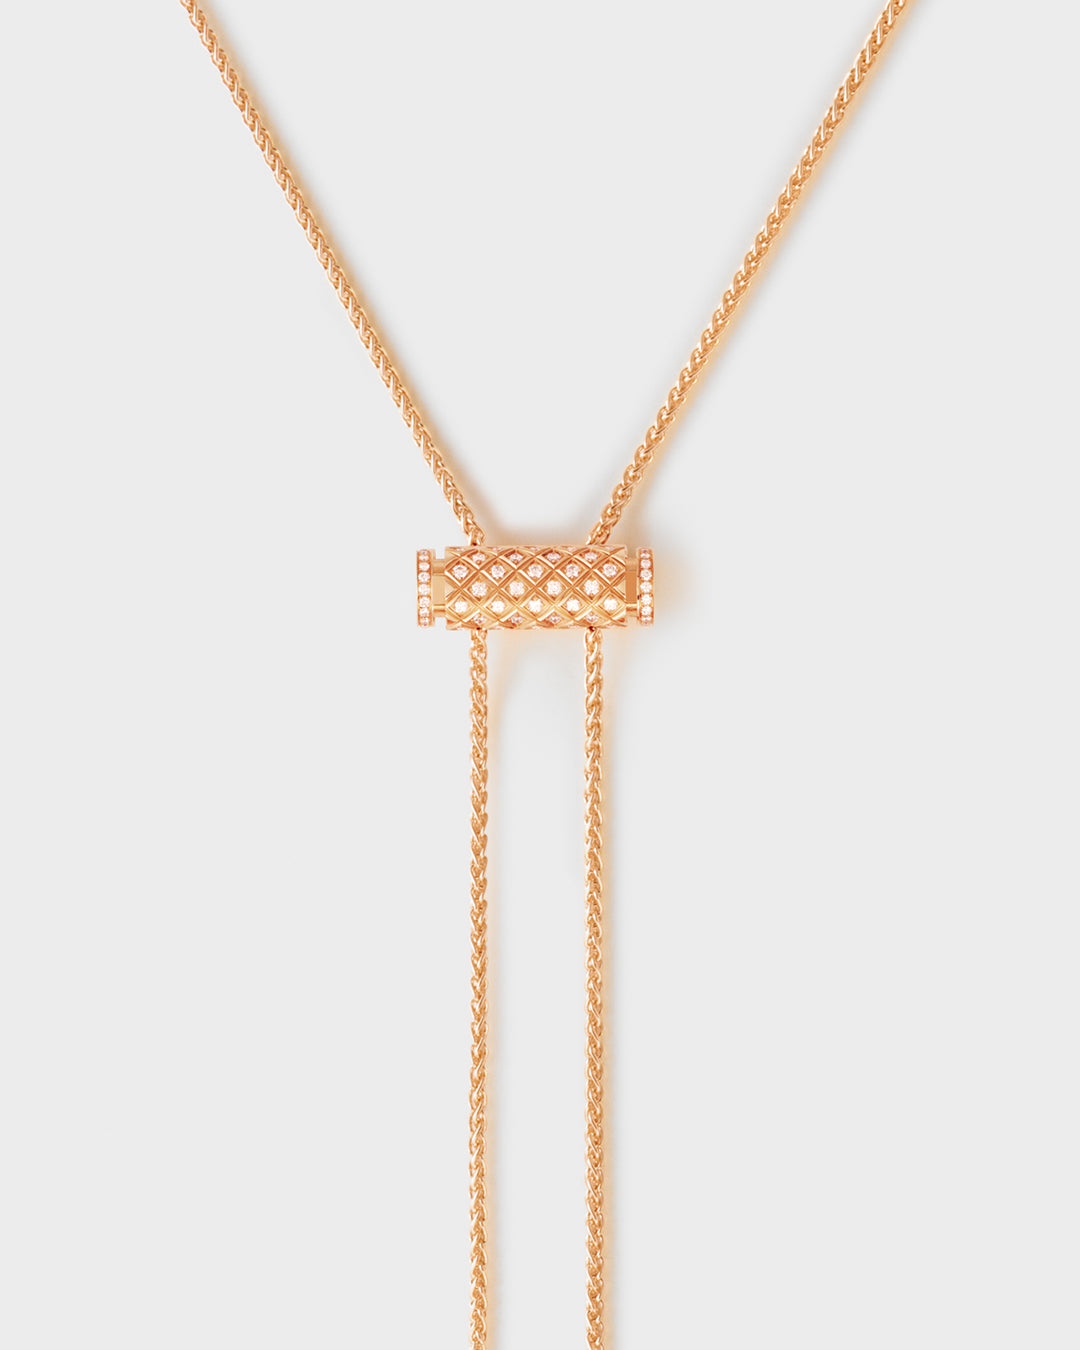 Diamond Latch Pendant on GM Chain in Rose Gold - 1 - Nouvel Heritage